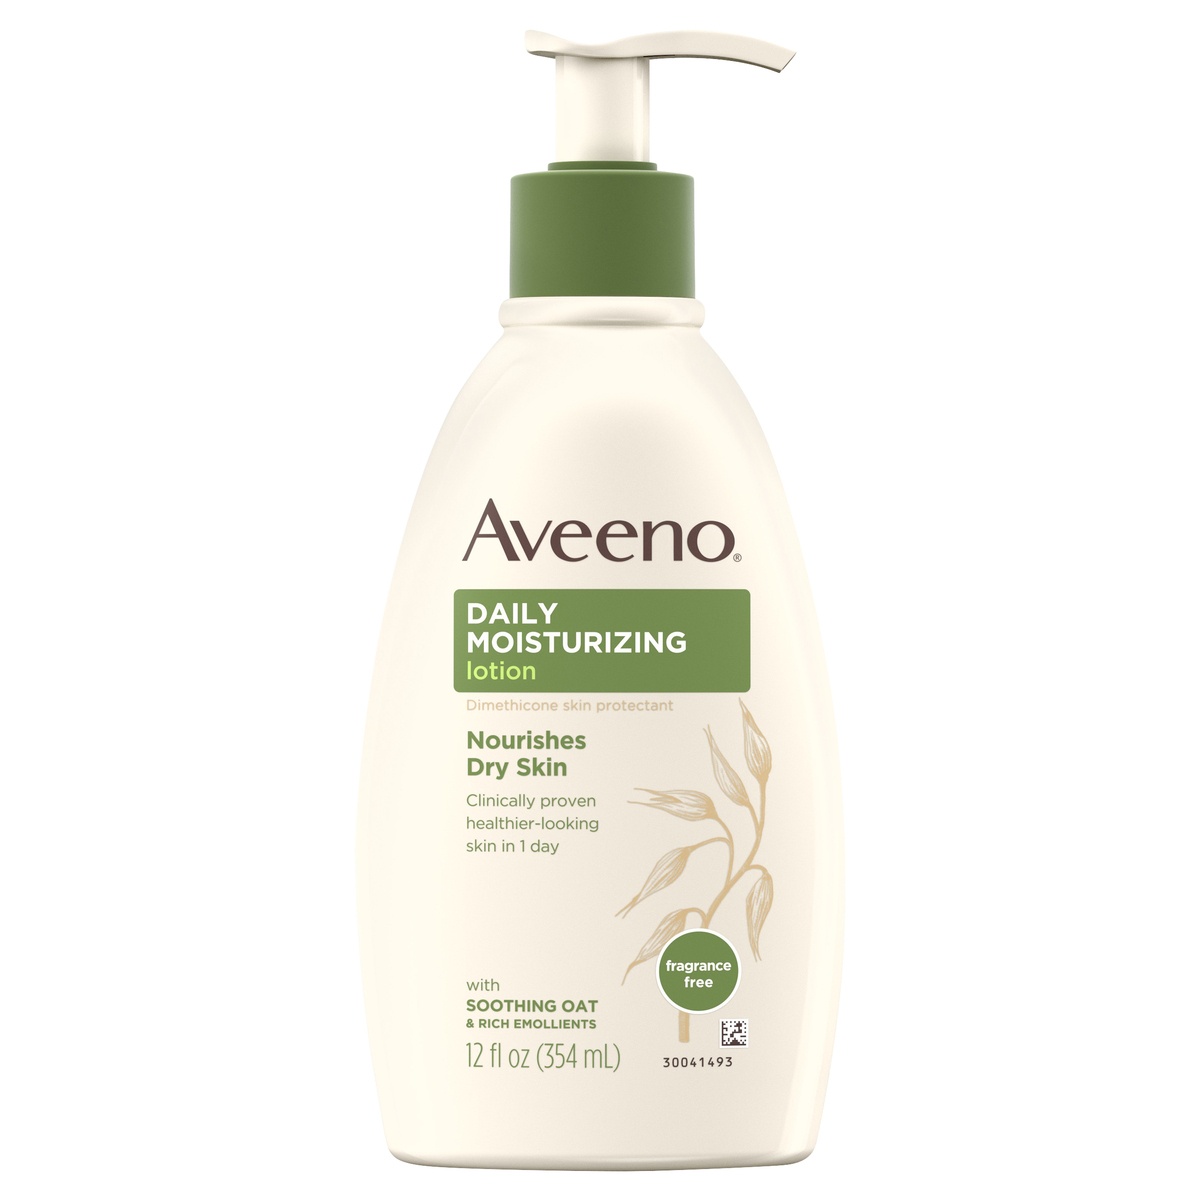 slide 6 of 6, Aveeno Daily Moisturizing Body Lotion with Soothing Oat and Rich Emollients to Nourish Dry Skin, Fragrance-Free, 12 fl oz